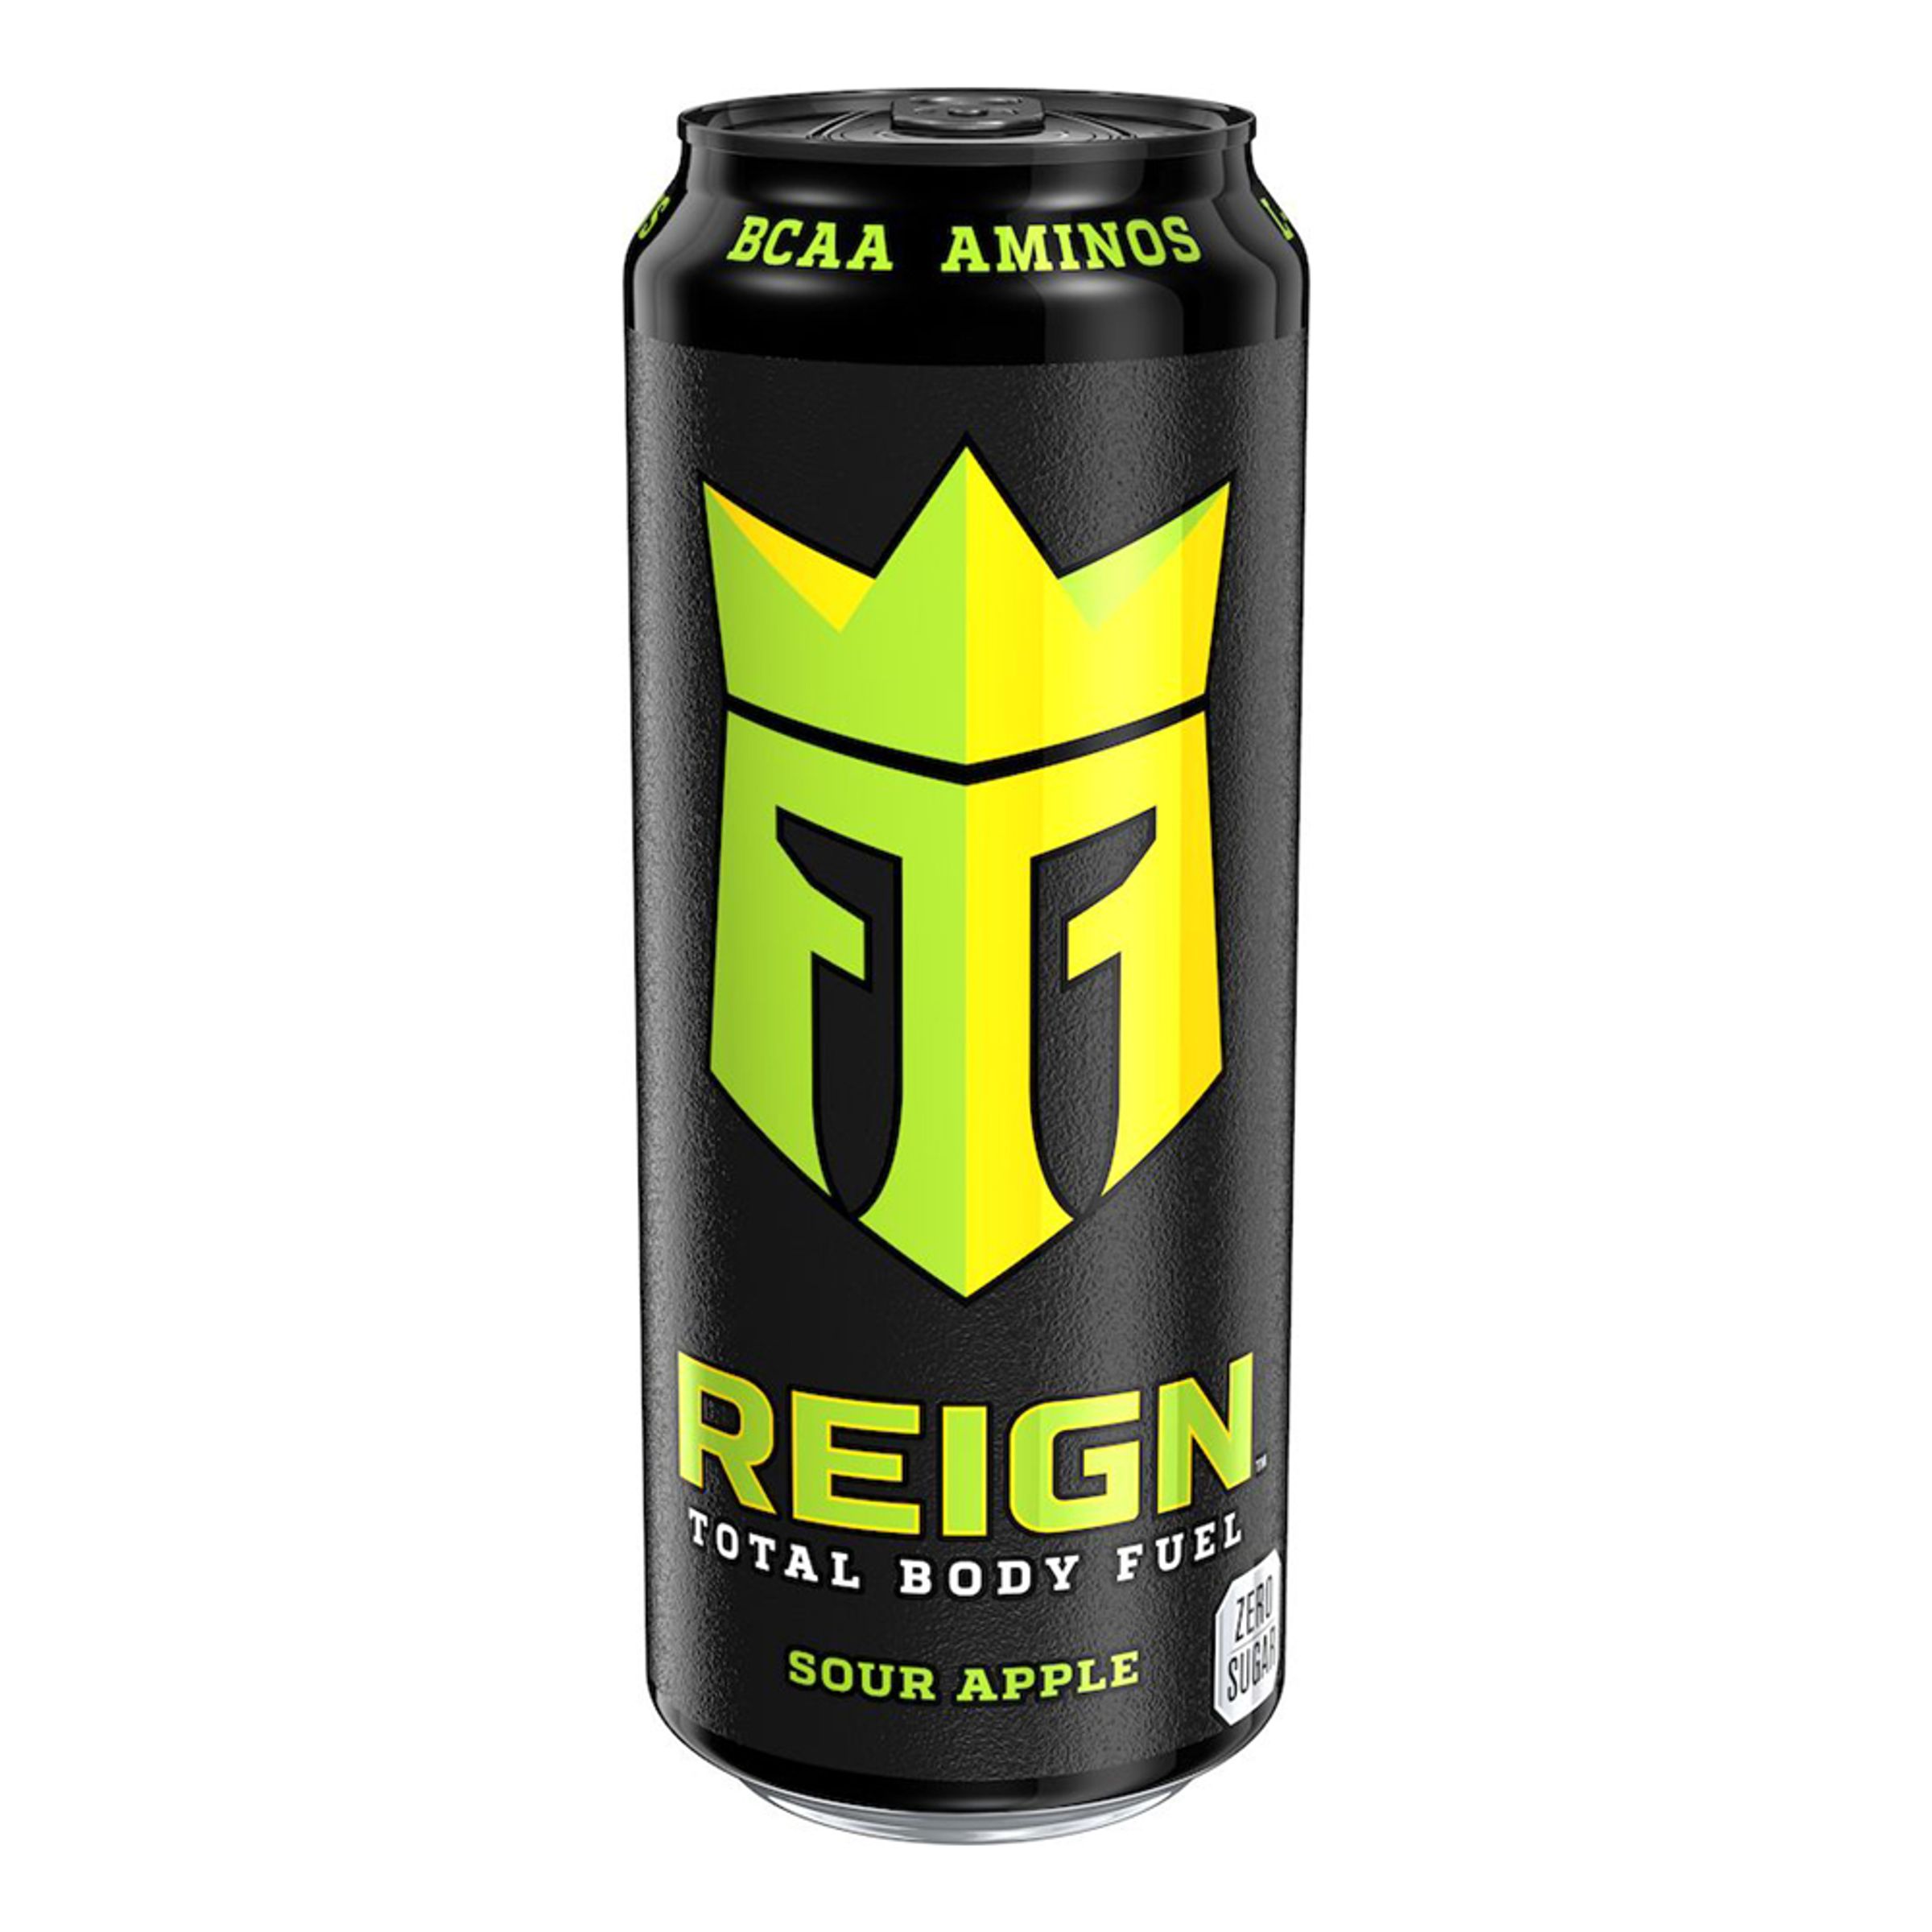 Reign Sour Apple Energidryck - 12-pack